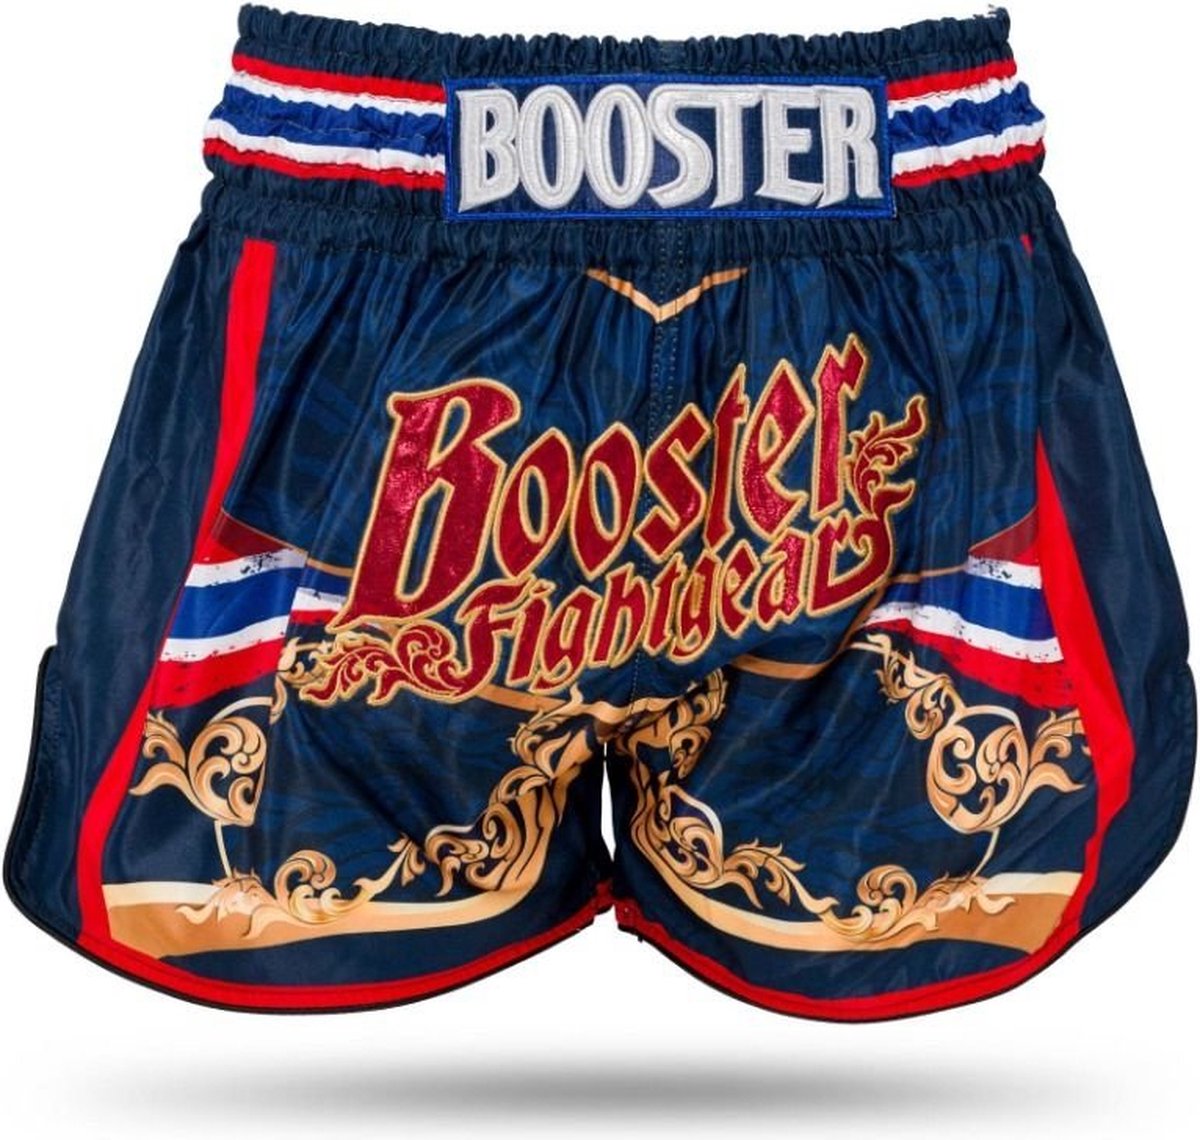 Booster Fightgear - Sportshort - TBT Country TH - L